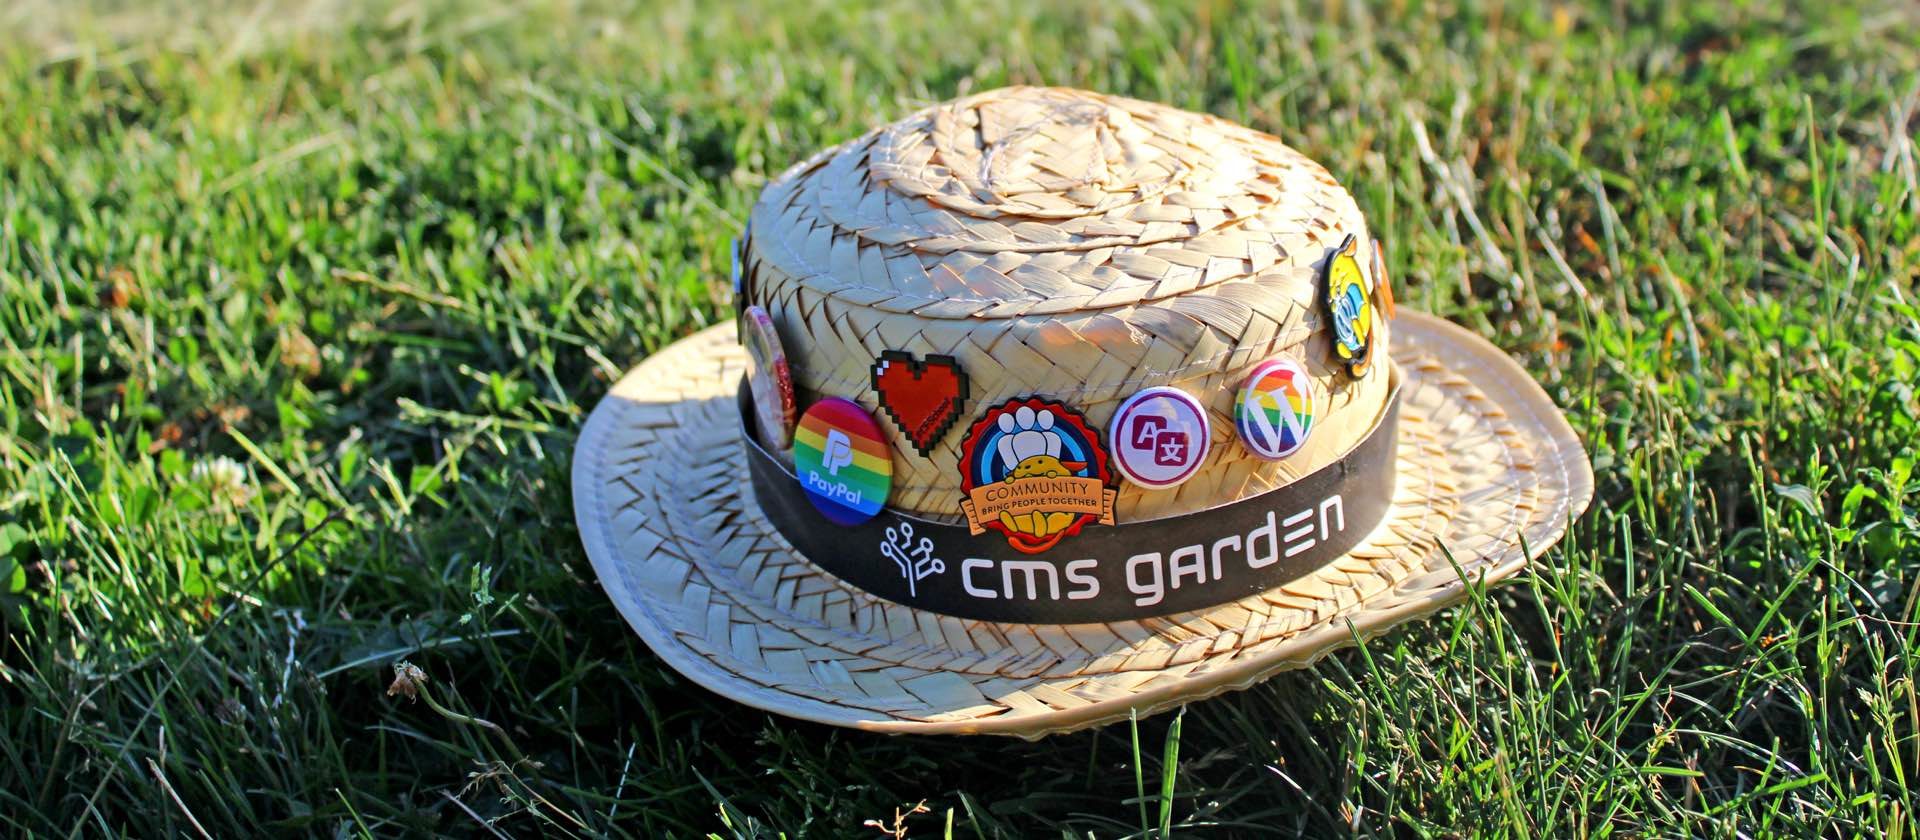 Robert's straw hat in the grass